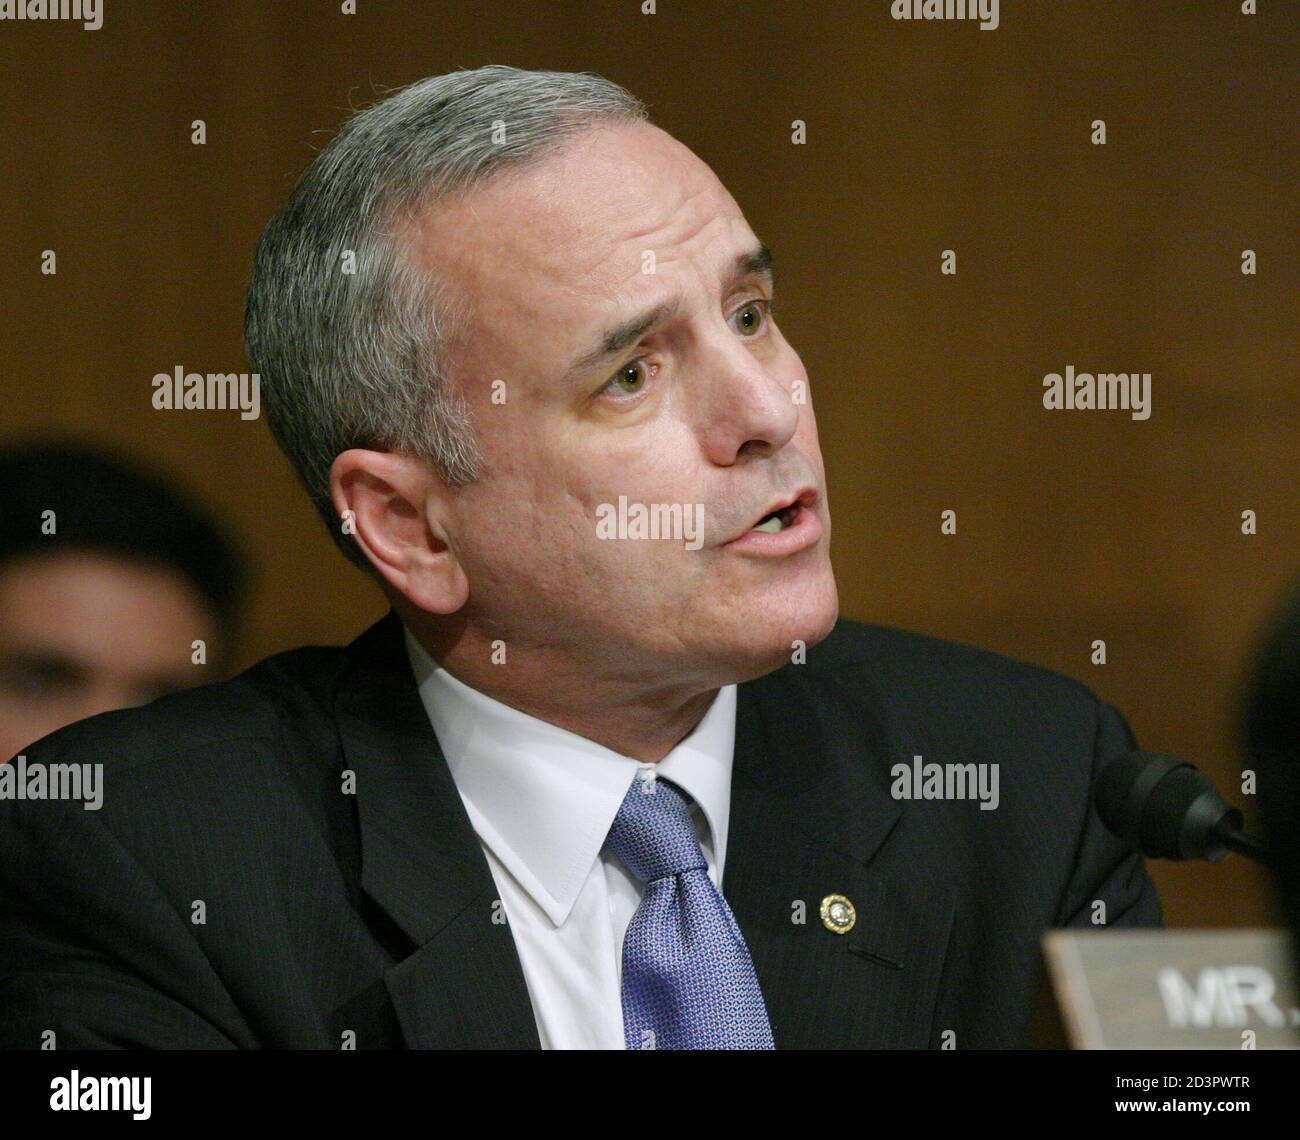 Senator Mark Dayton (D-MN) questions U.S. Secretary of Defense Donald Rumsfeld during his testimony on Iraq prison abuse before the Senate Armed Services Committee on Capitol Hill in Washington, May 7, 2004. Rumsfeld, under pressure to resign, warned that many more pictures showing cruel acts by U.S. personnel would follow those that have shocked the world, eroded Iraqi trust and further savaged the image of the United States in the Arab world. REUTERS/Molly Riley  MMR/JDP Stock Photo